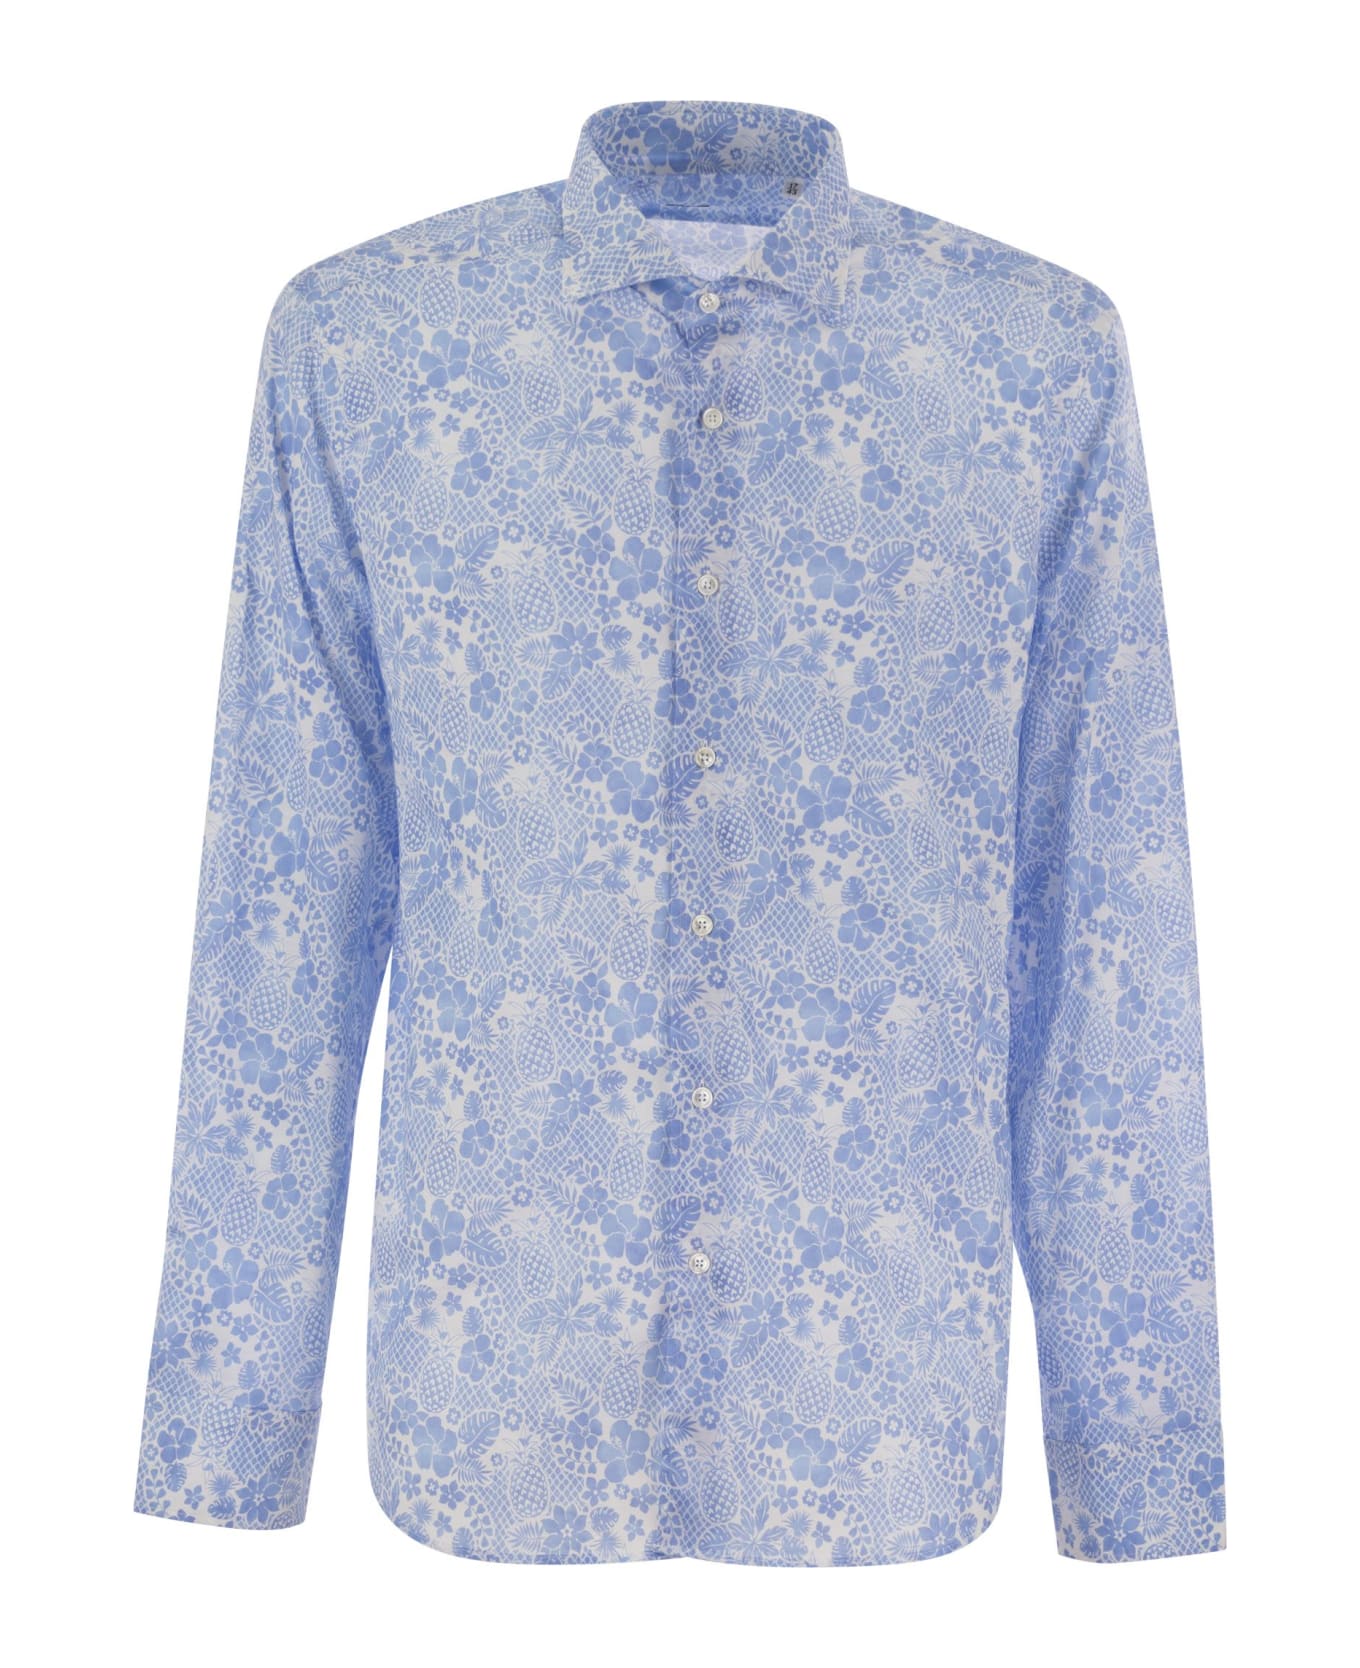 Fedeli Printed Stretch Cotton Voile Shirt - Light Blue